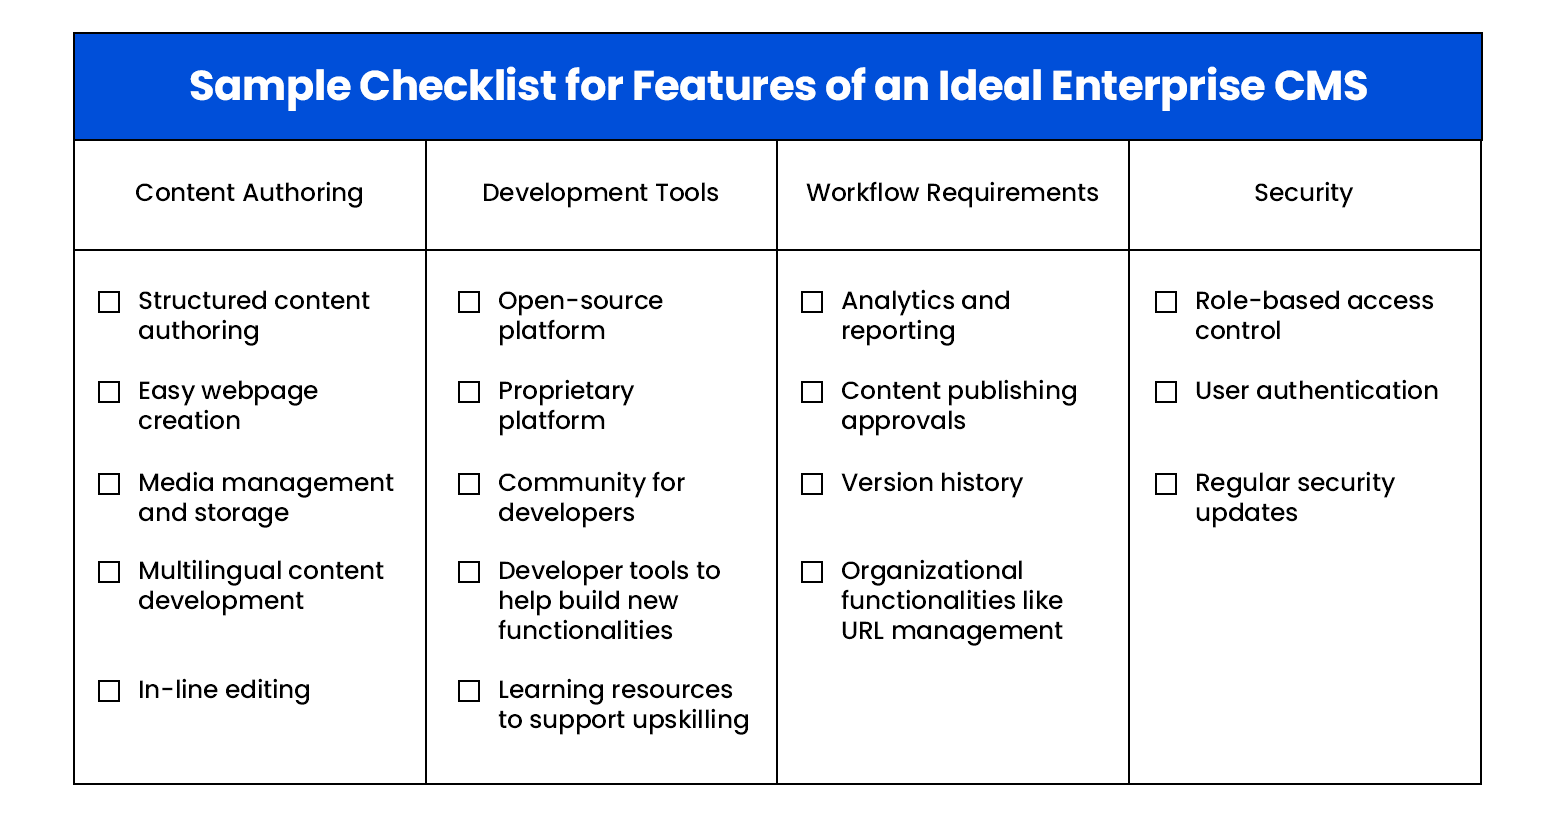 Sample Checklist for Features of an Ideal Enterprise CMS